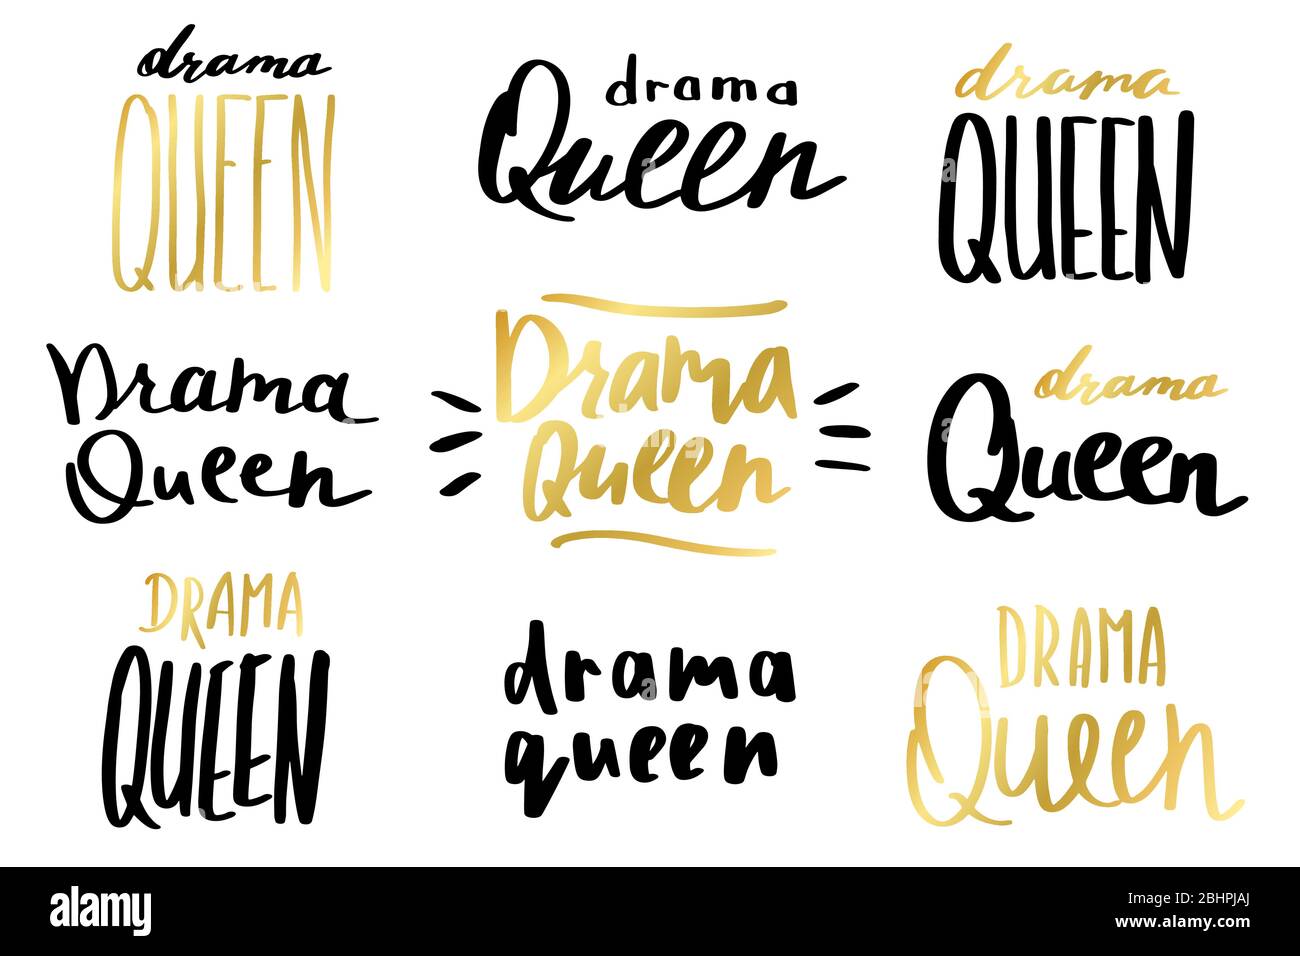 Drama Queen print set in simple doodle style. Trendy inscription, handwritten slogan. Girly lettering design for t-shirt prints, phone cases, mugs or posters. Vintage vector illustration Stock Vector